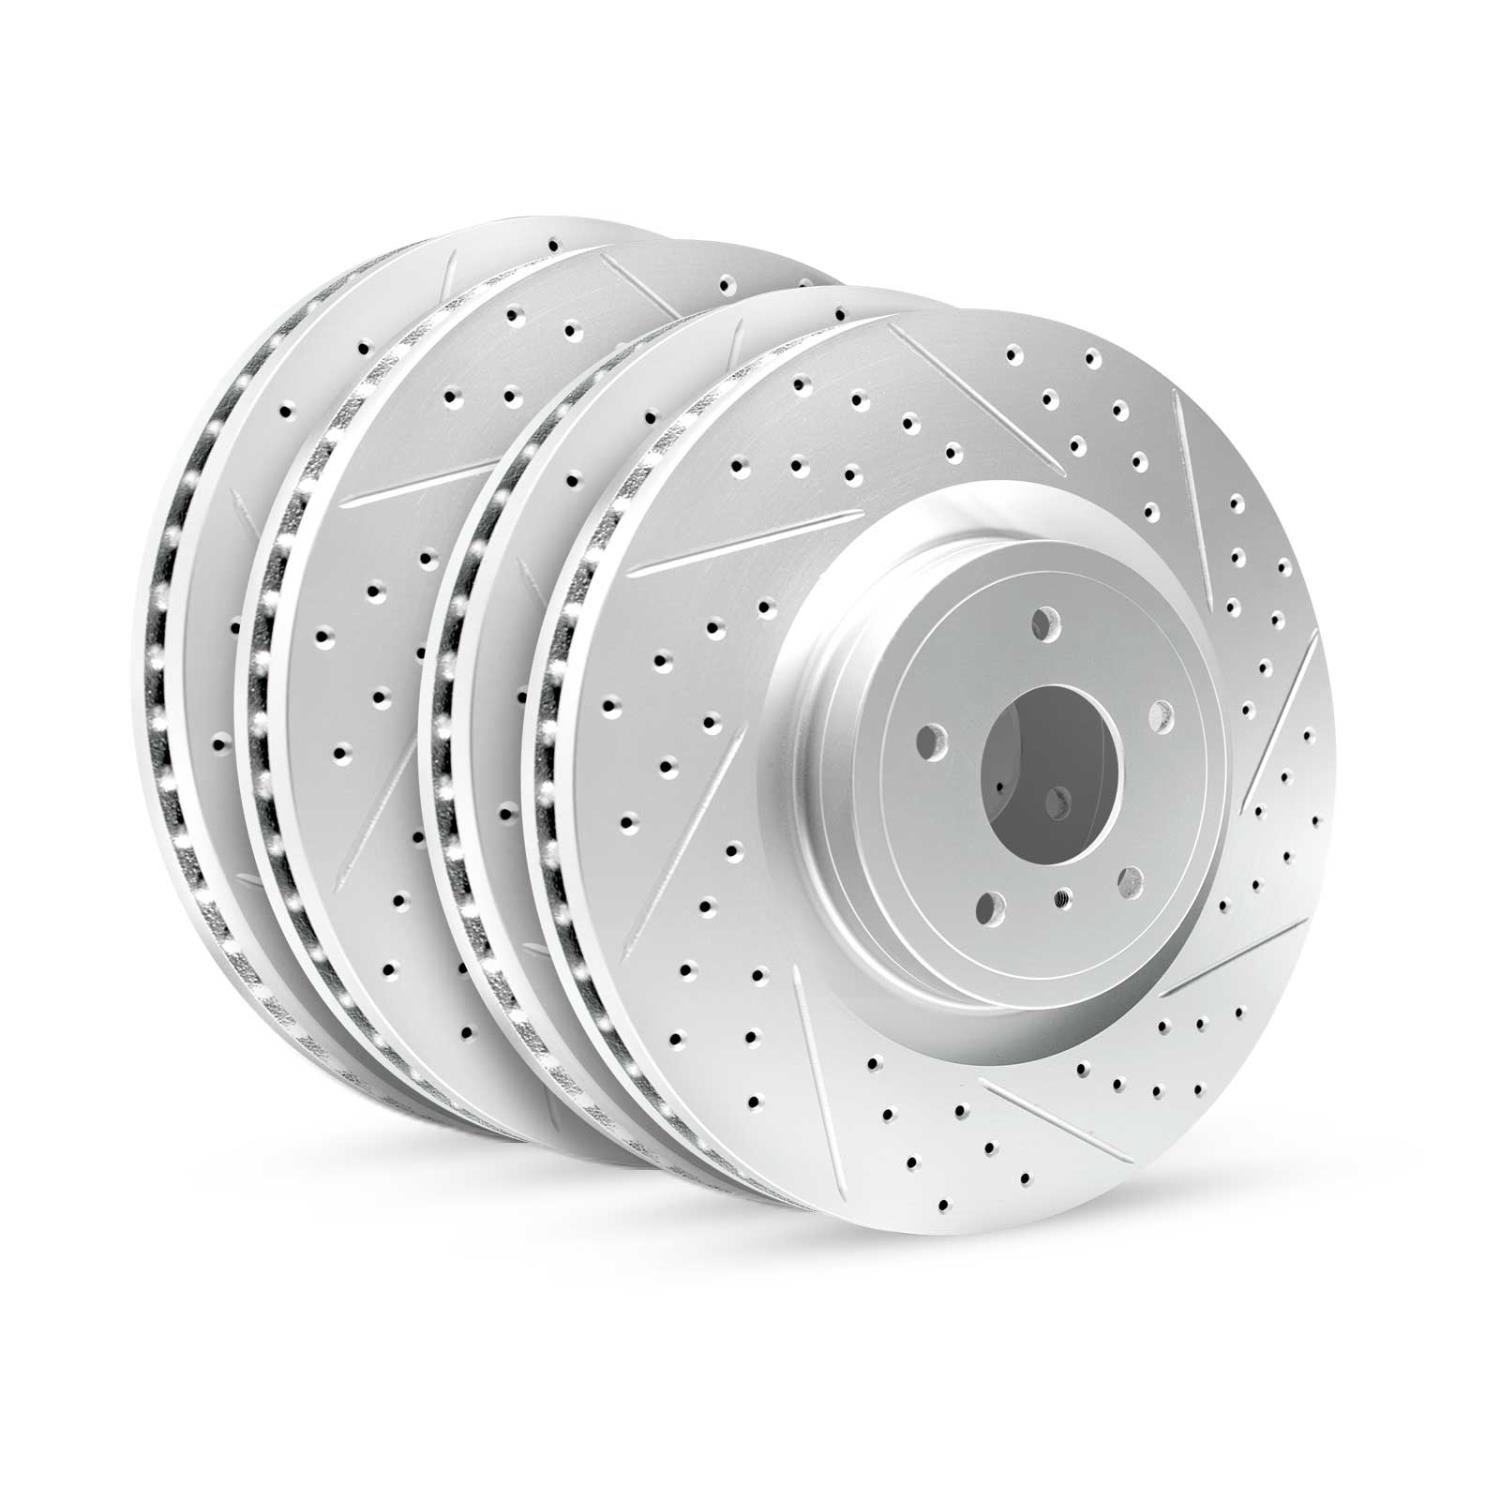 GEO-Carbon Drilled/Slotted Rotors, 2015-2015 BMW, Position: Front/Rear